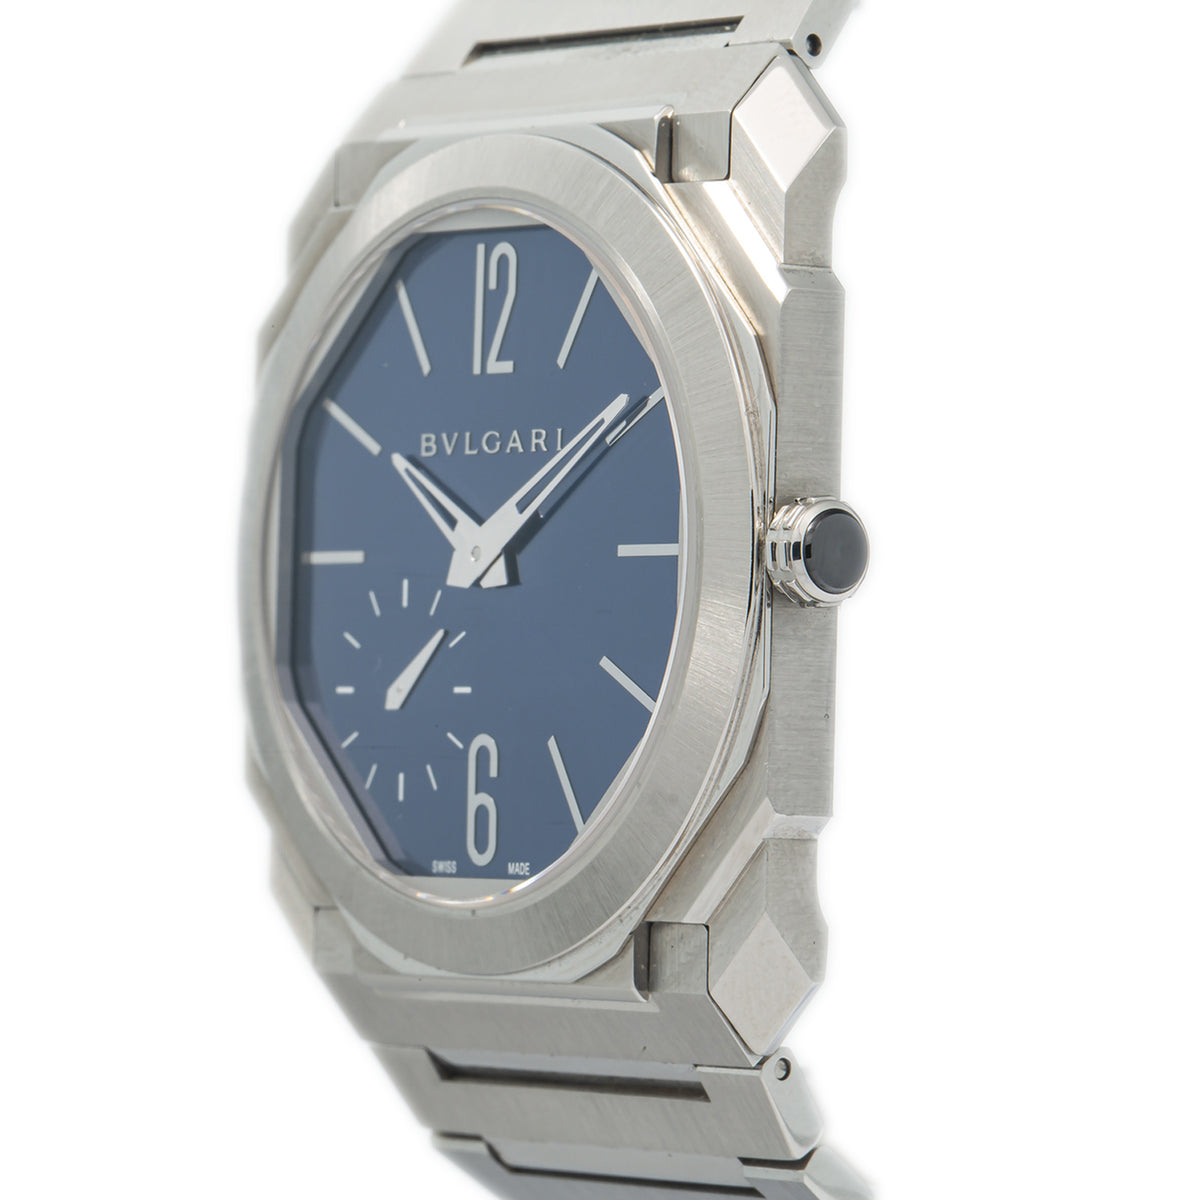 Bvlgari Octo Finissimo 10341 NEW Extra Thin Steel Blue Dial Watch 40mm Box&Paper